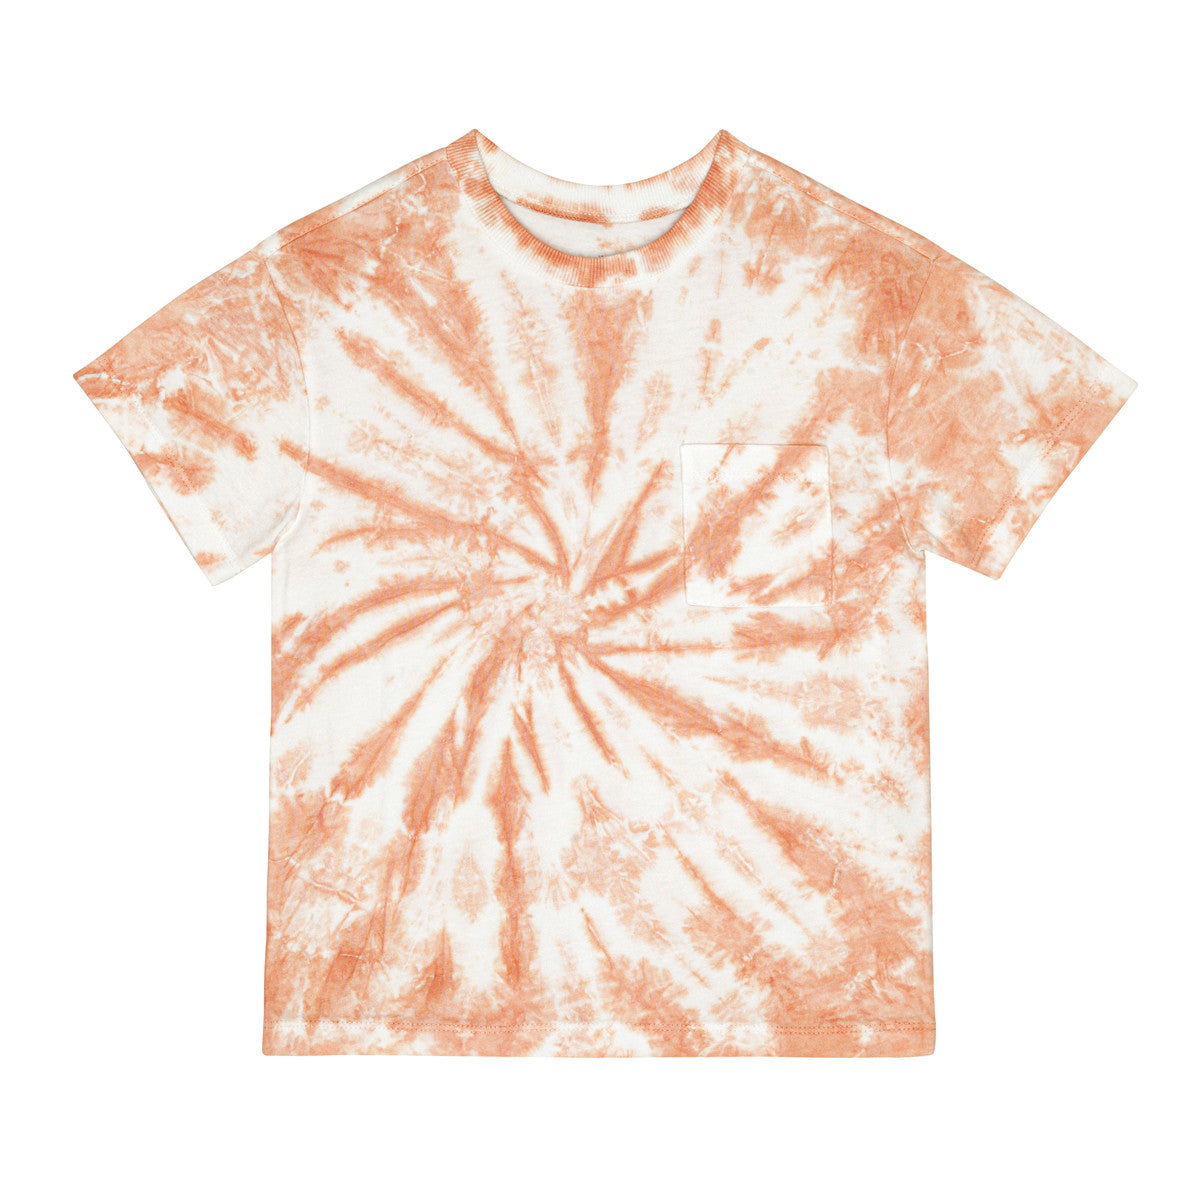 Little Hedonist round neck shirt in tie-dye fog for boys and girls. For this shirt we use the best premium organic cotton for light and easy fit! Sustainable kids clothing.